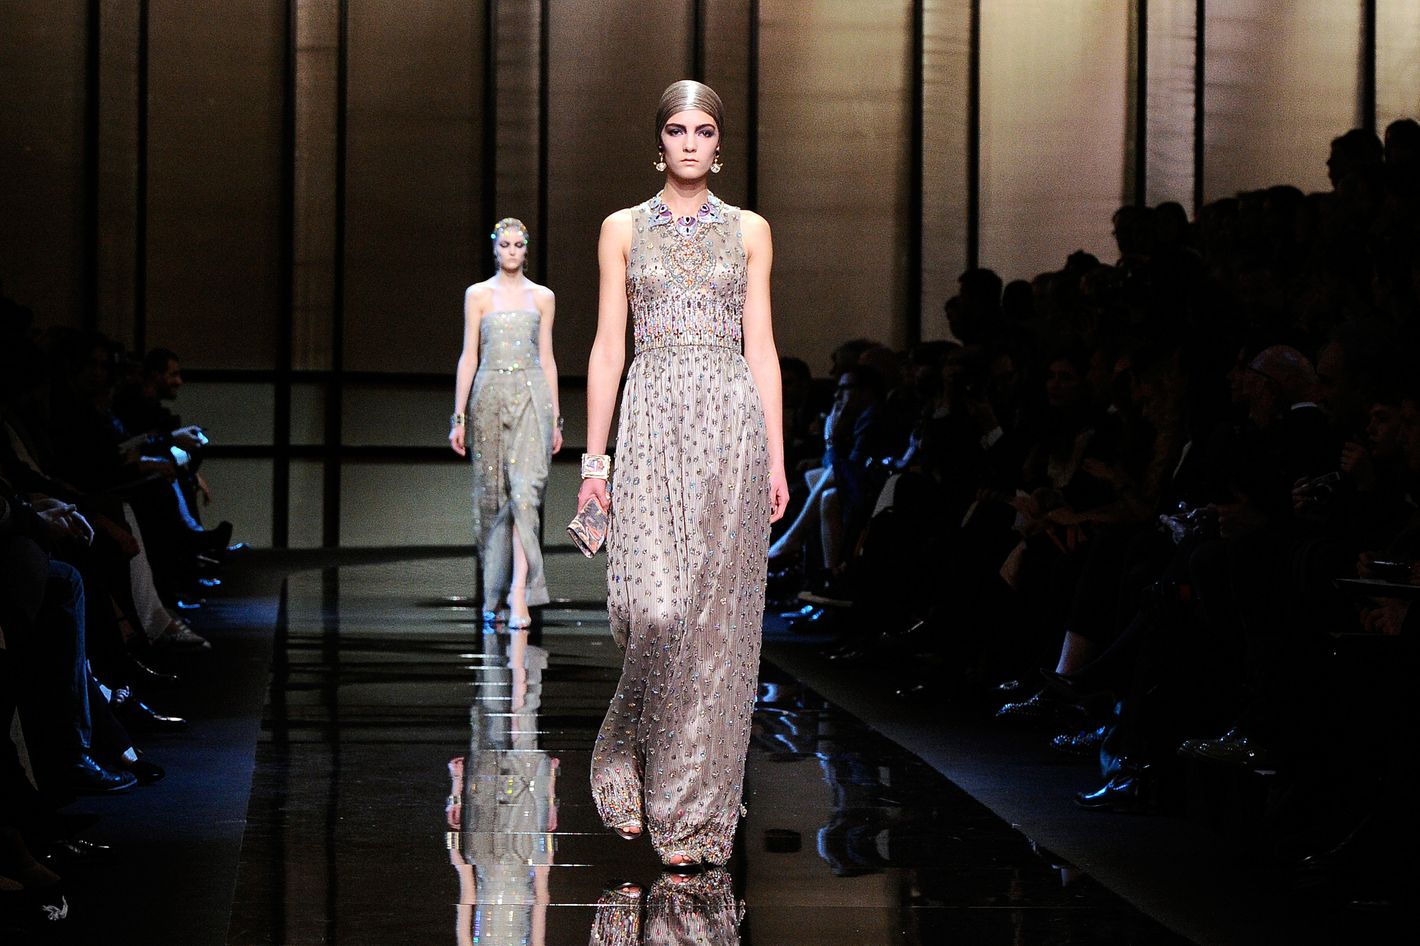 Best Dressed at Giorgio Armani's One Night Only Couture Show in New York  City